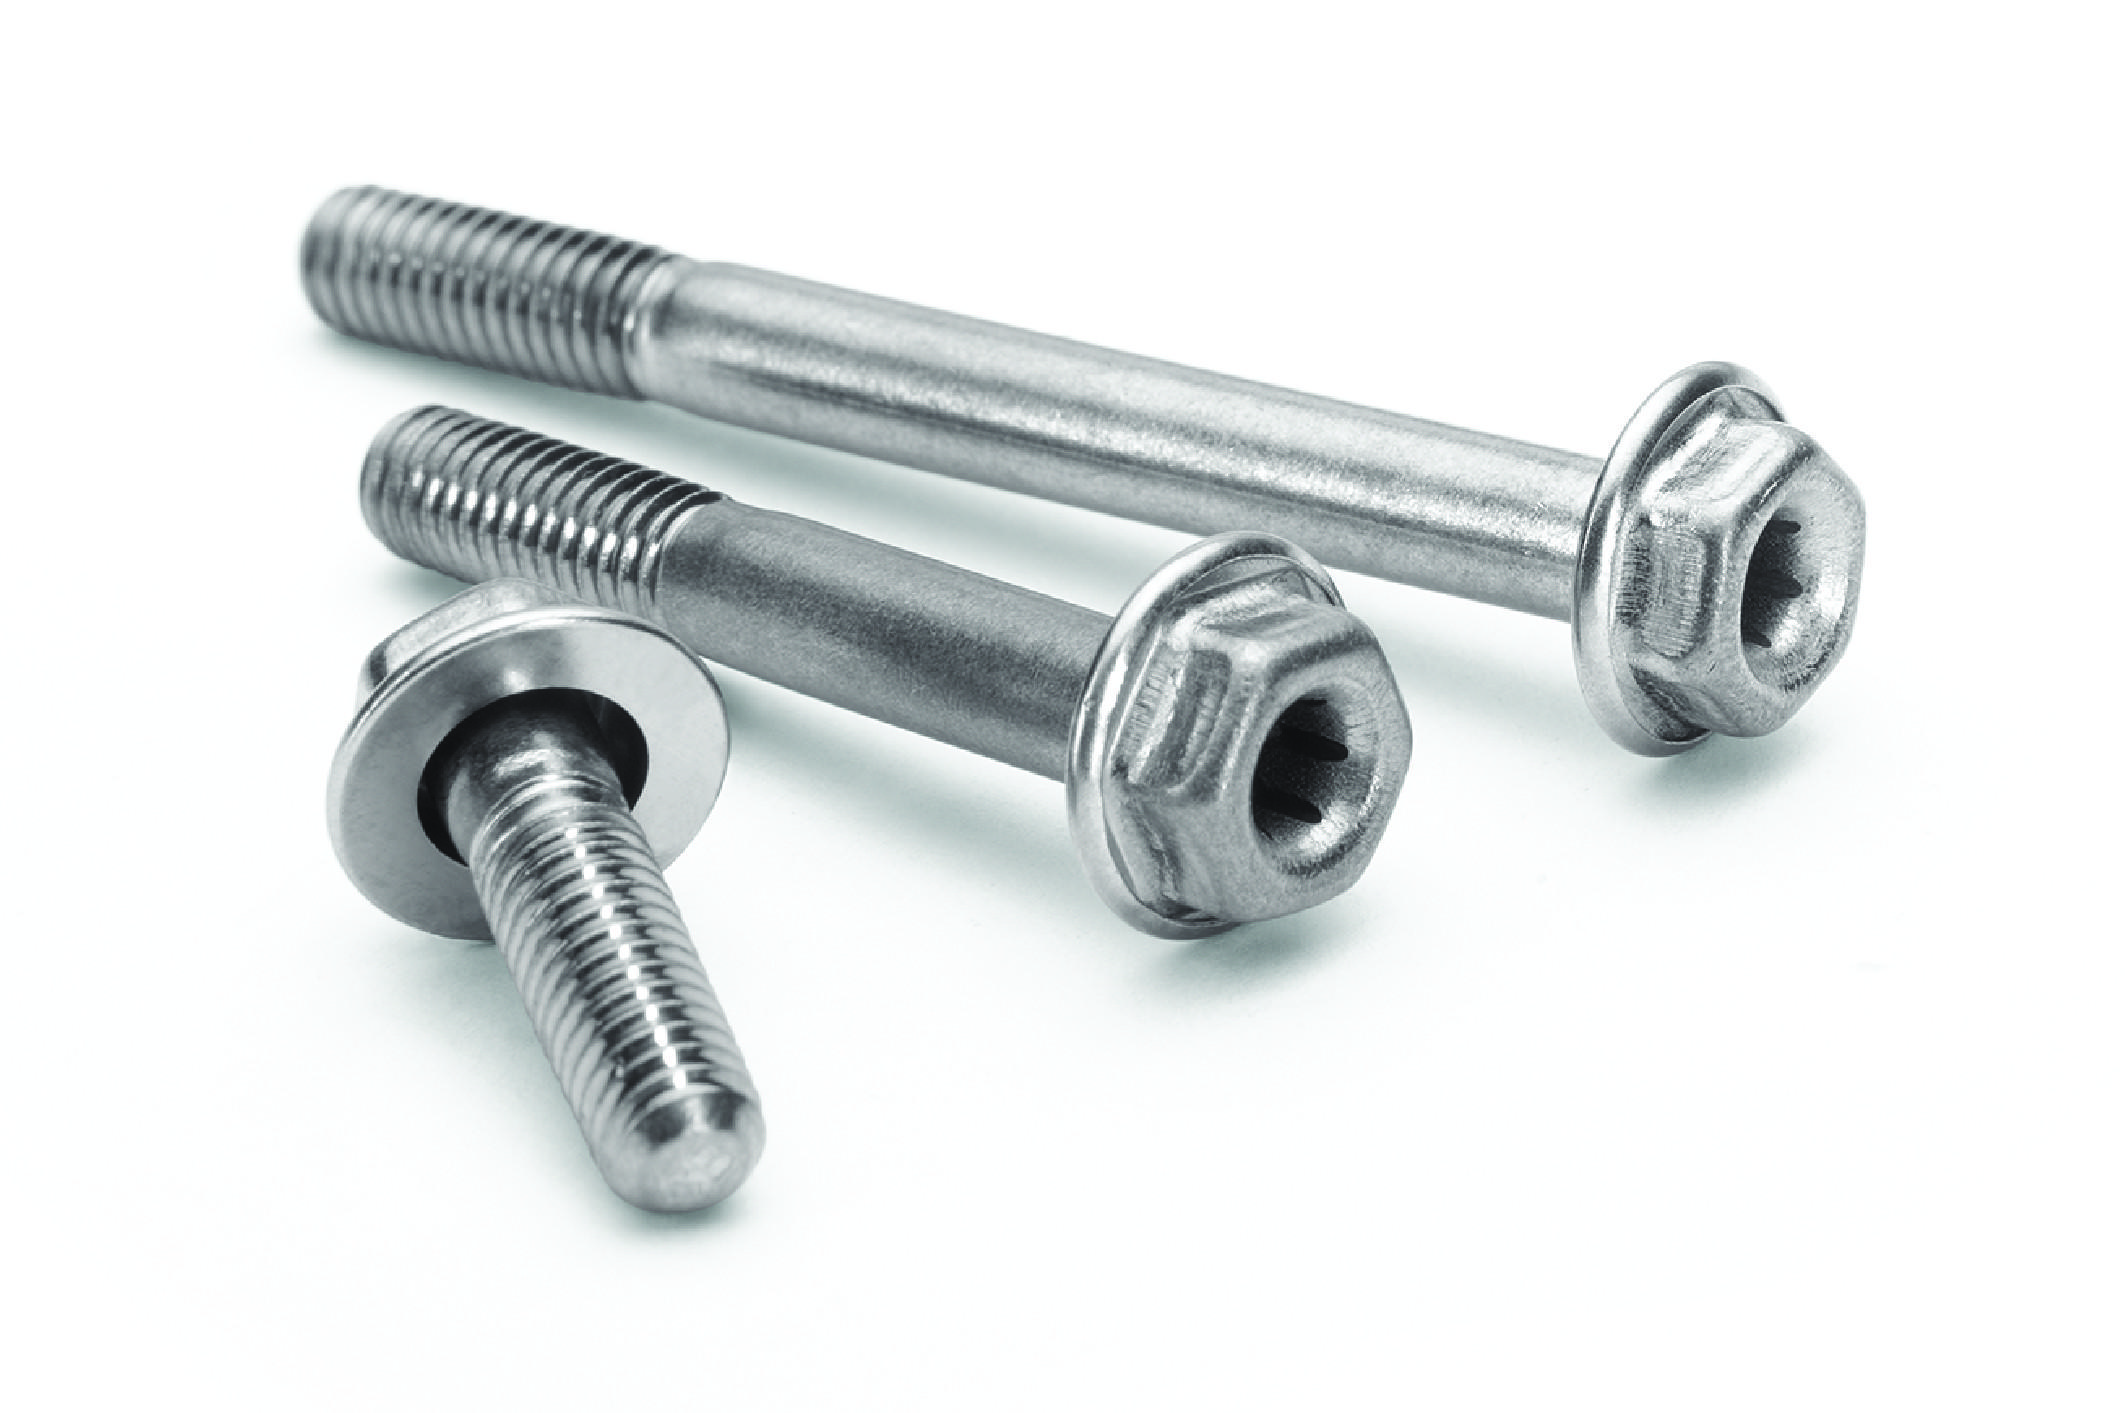 Click Bond which is exhibiting at ADEX 2021, has engineered a breakthrough in lightweight aerospace fasteners by introducing the hollow-shank LoMas Screw